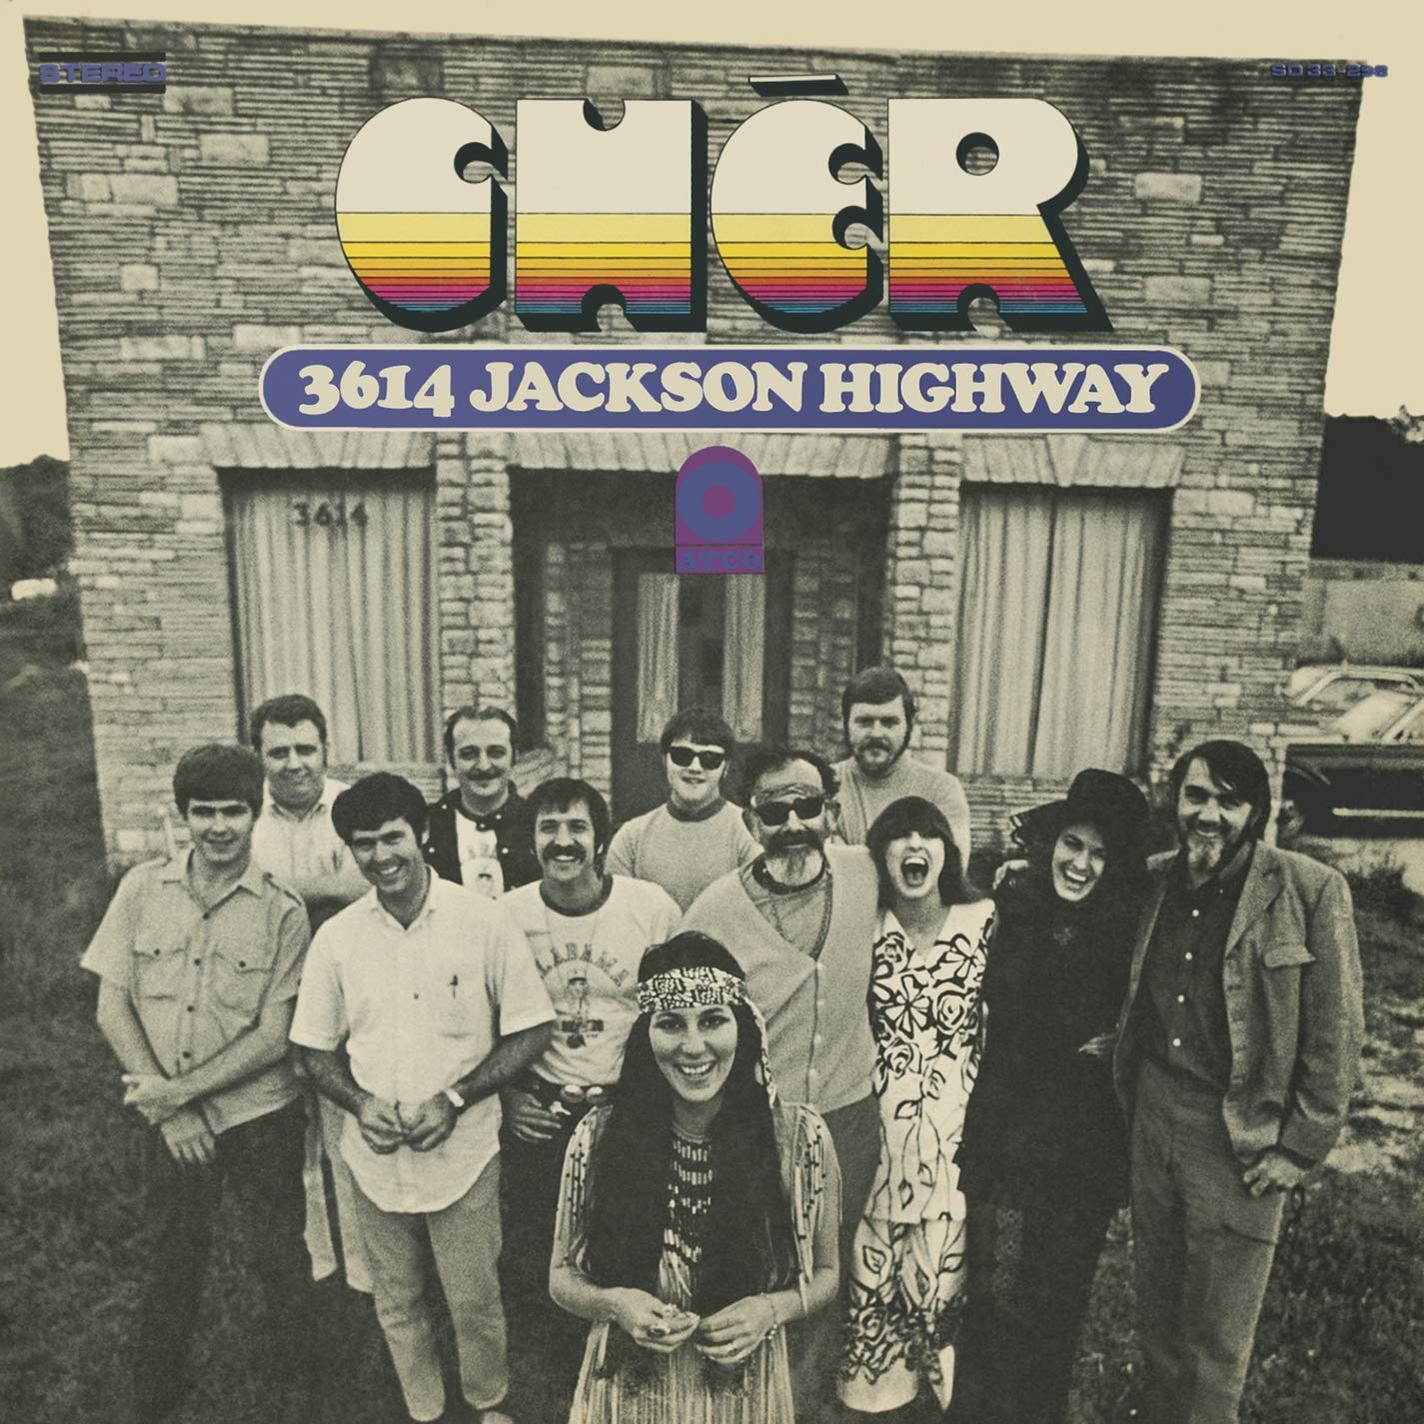 - Jackson Edition) Highway 3614 (Expanded - (Vinyl) Cher